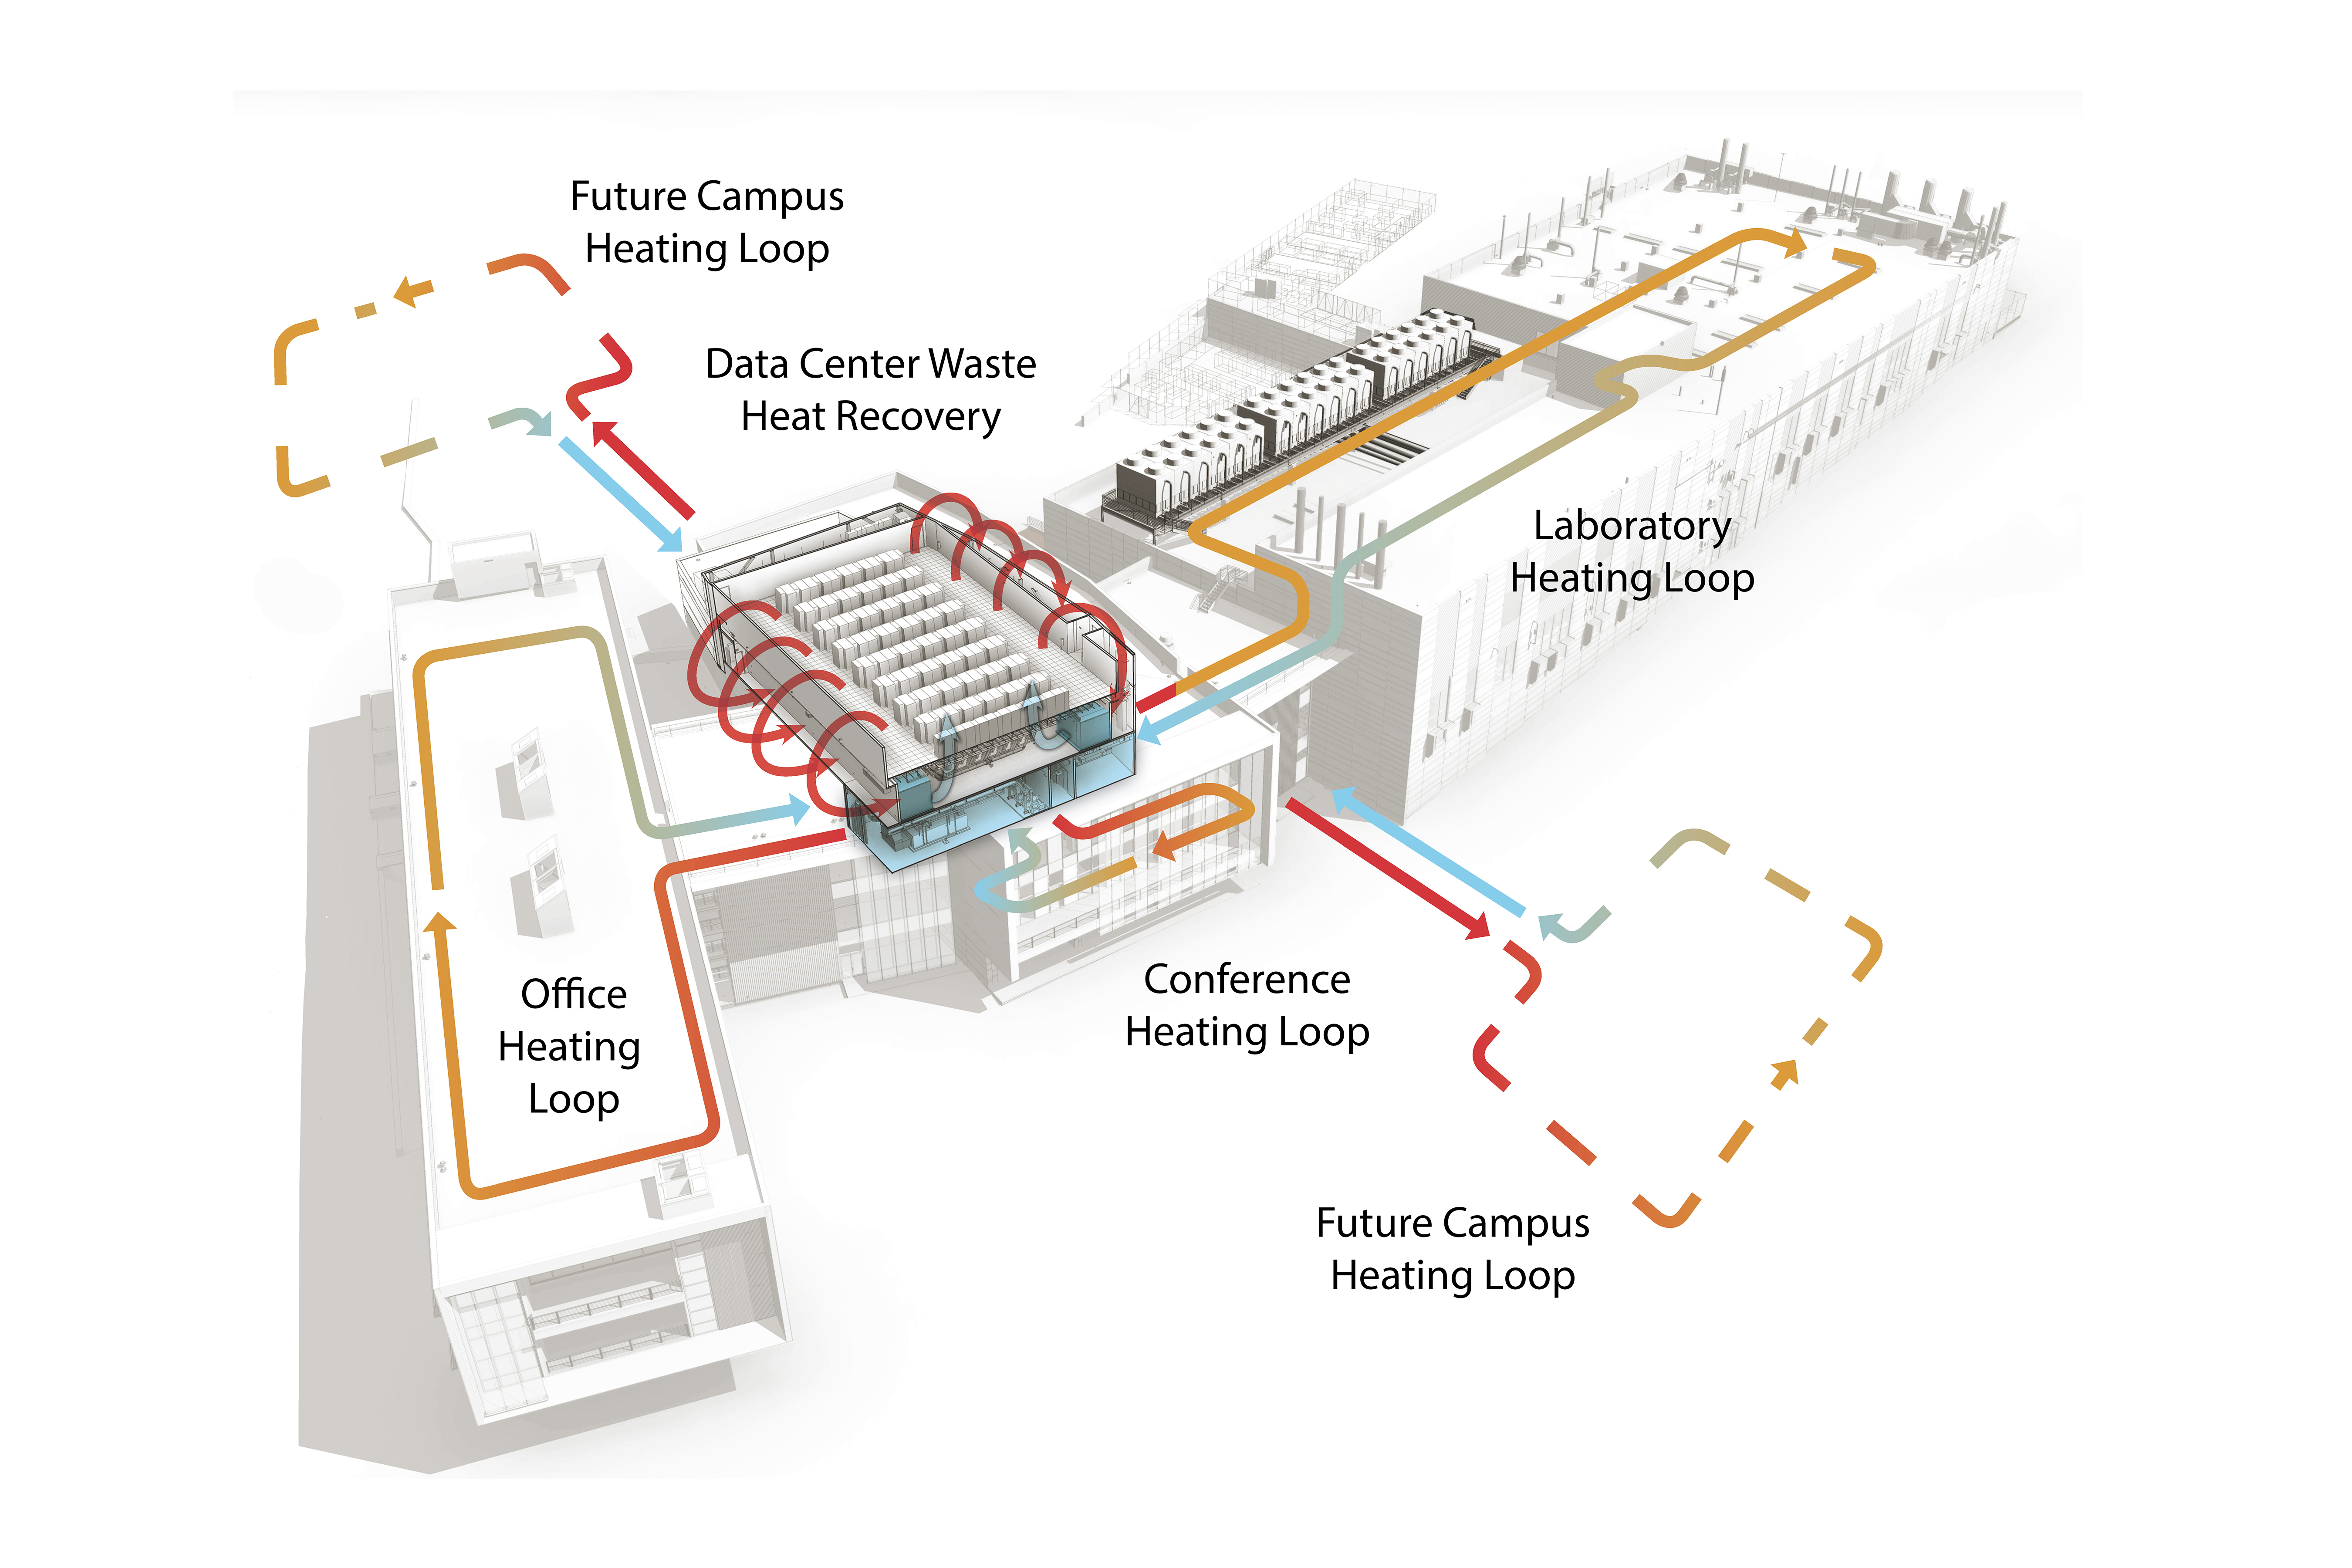 Waste heat recovery systems